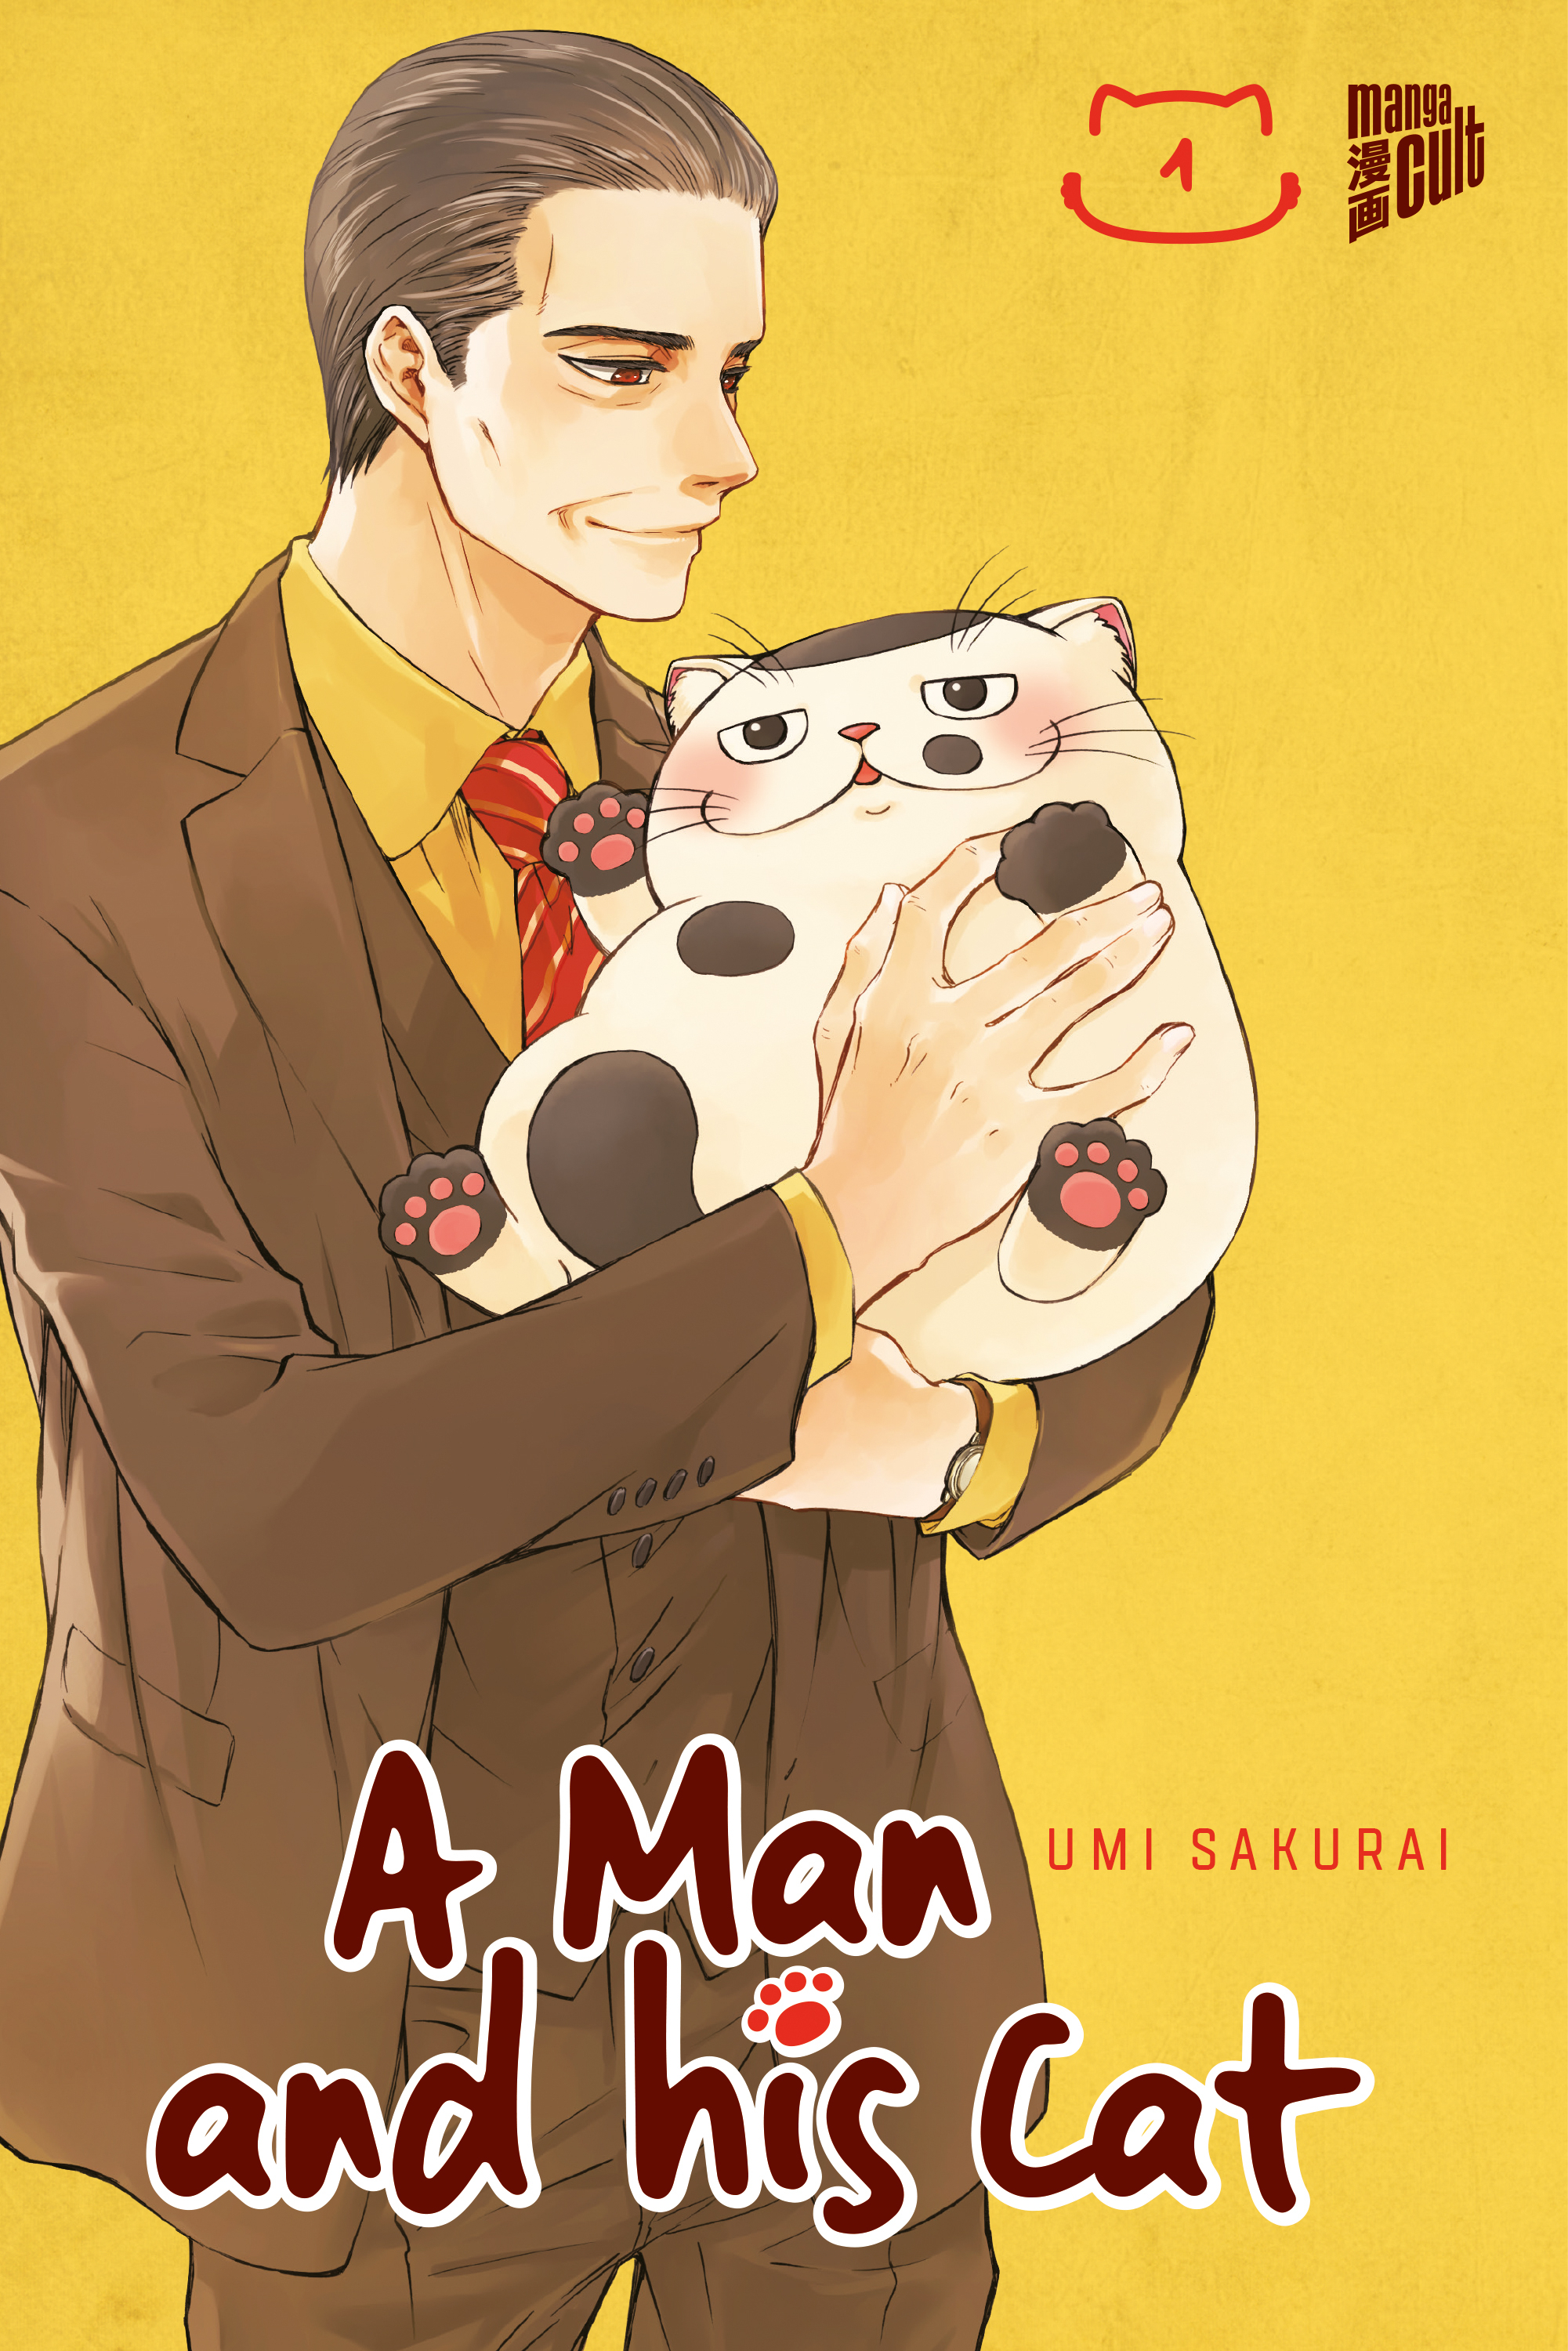 A Man And His Cat 01 Manga (New)